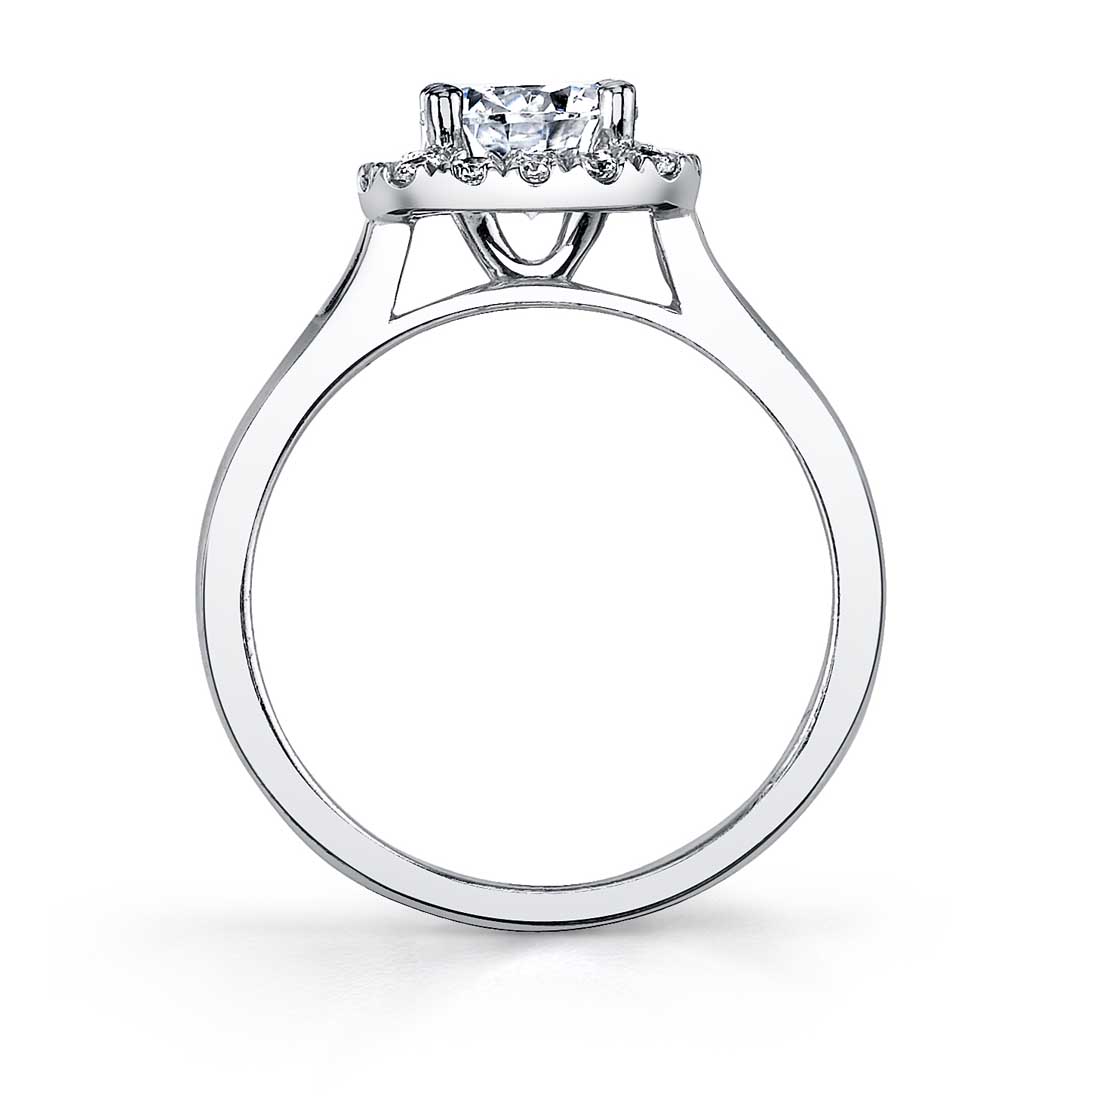 Profile Image of a Cushion Cut Engagement Ring